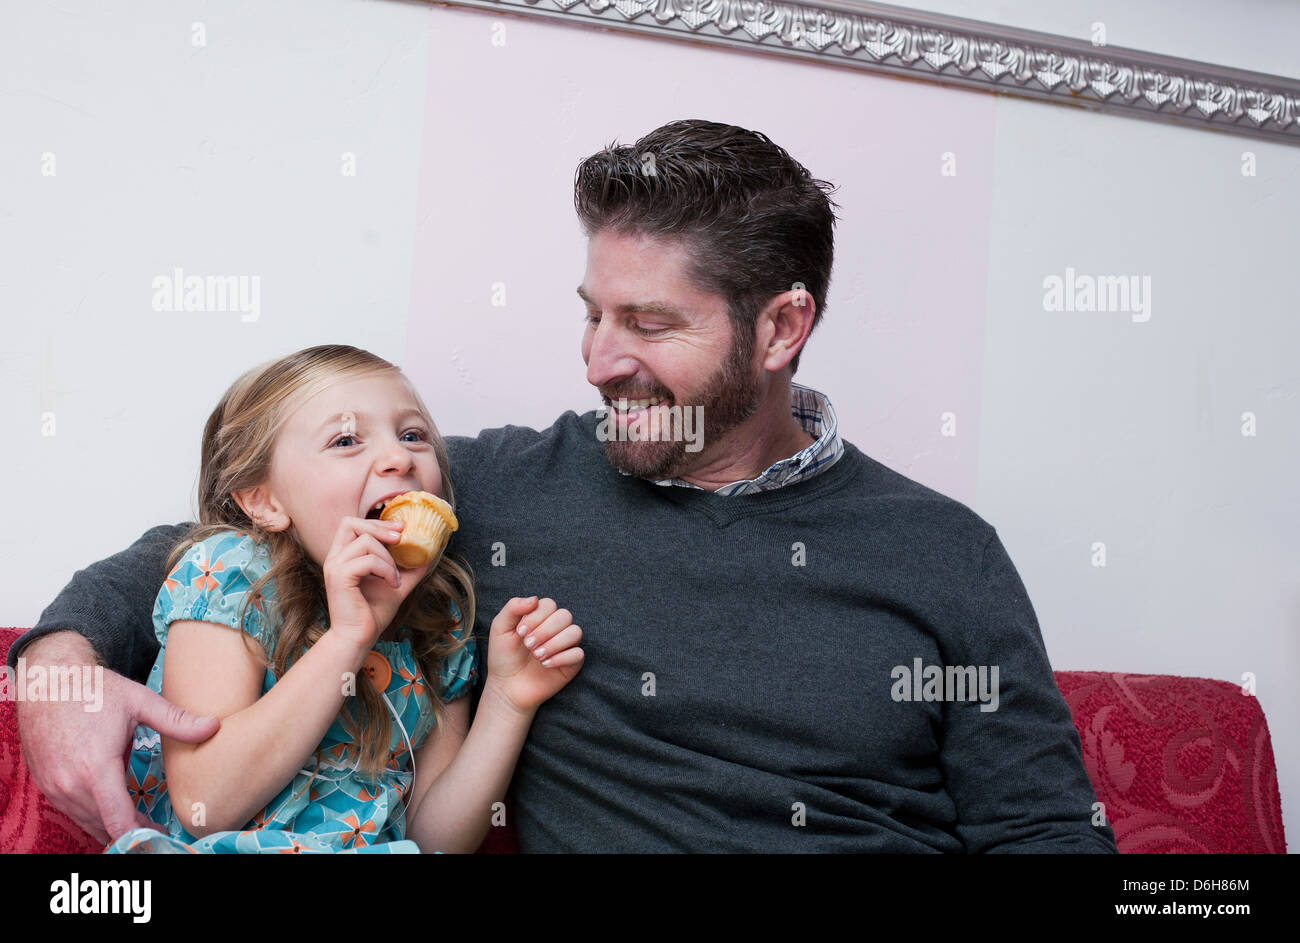 Father and daughter eating cupcakes Stock Photo